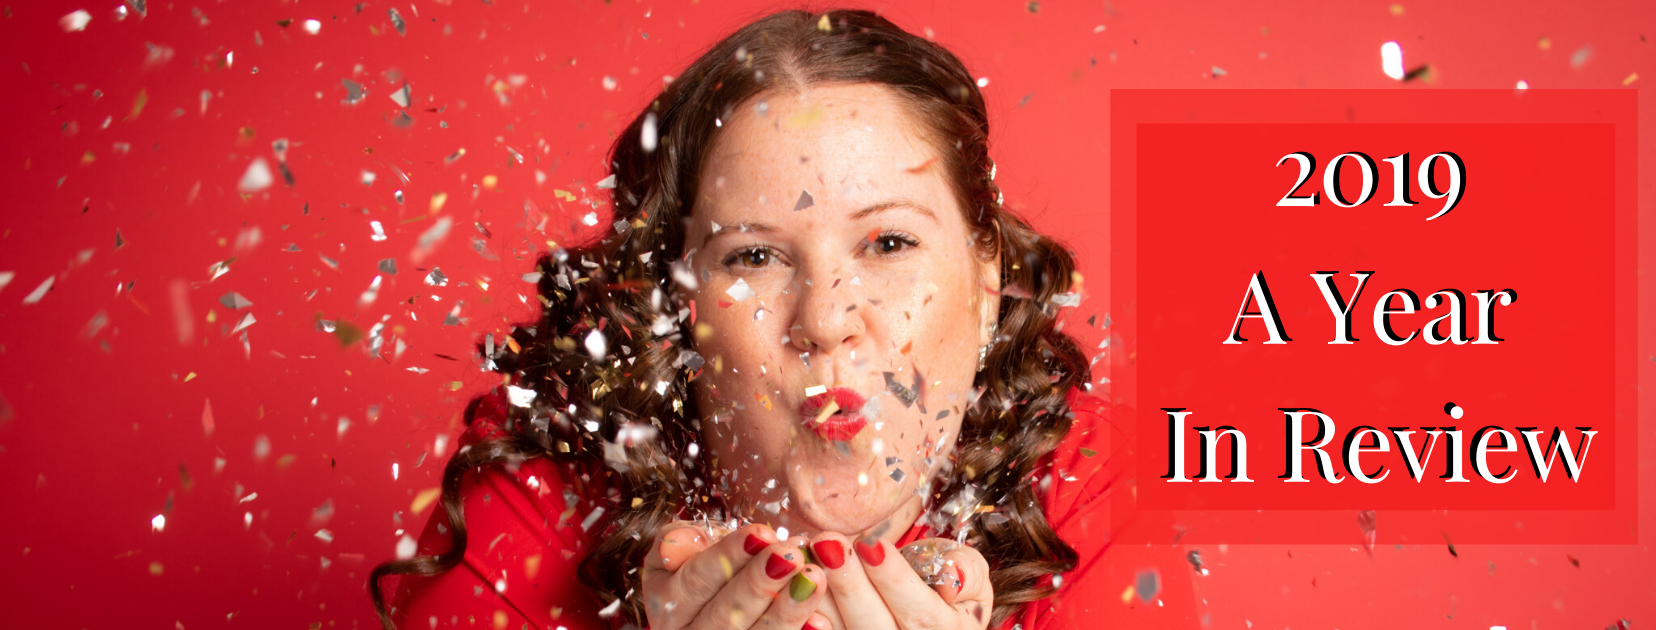 A photo of Erica Steeves blowing gold and silver glitter towards the camera wearing a red blouse on a red background